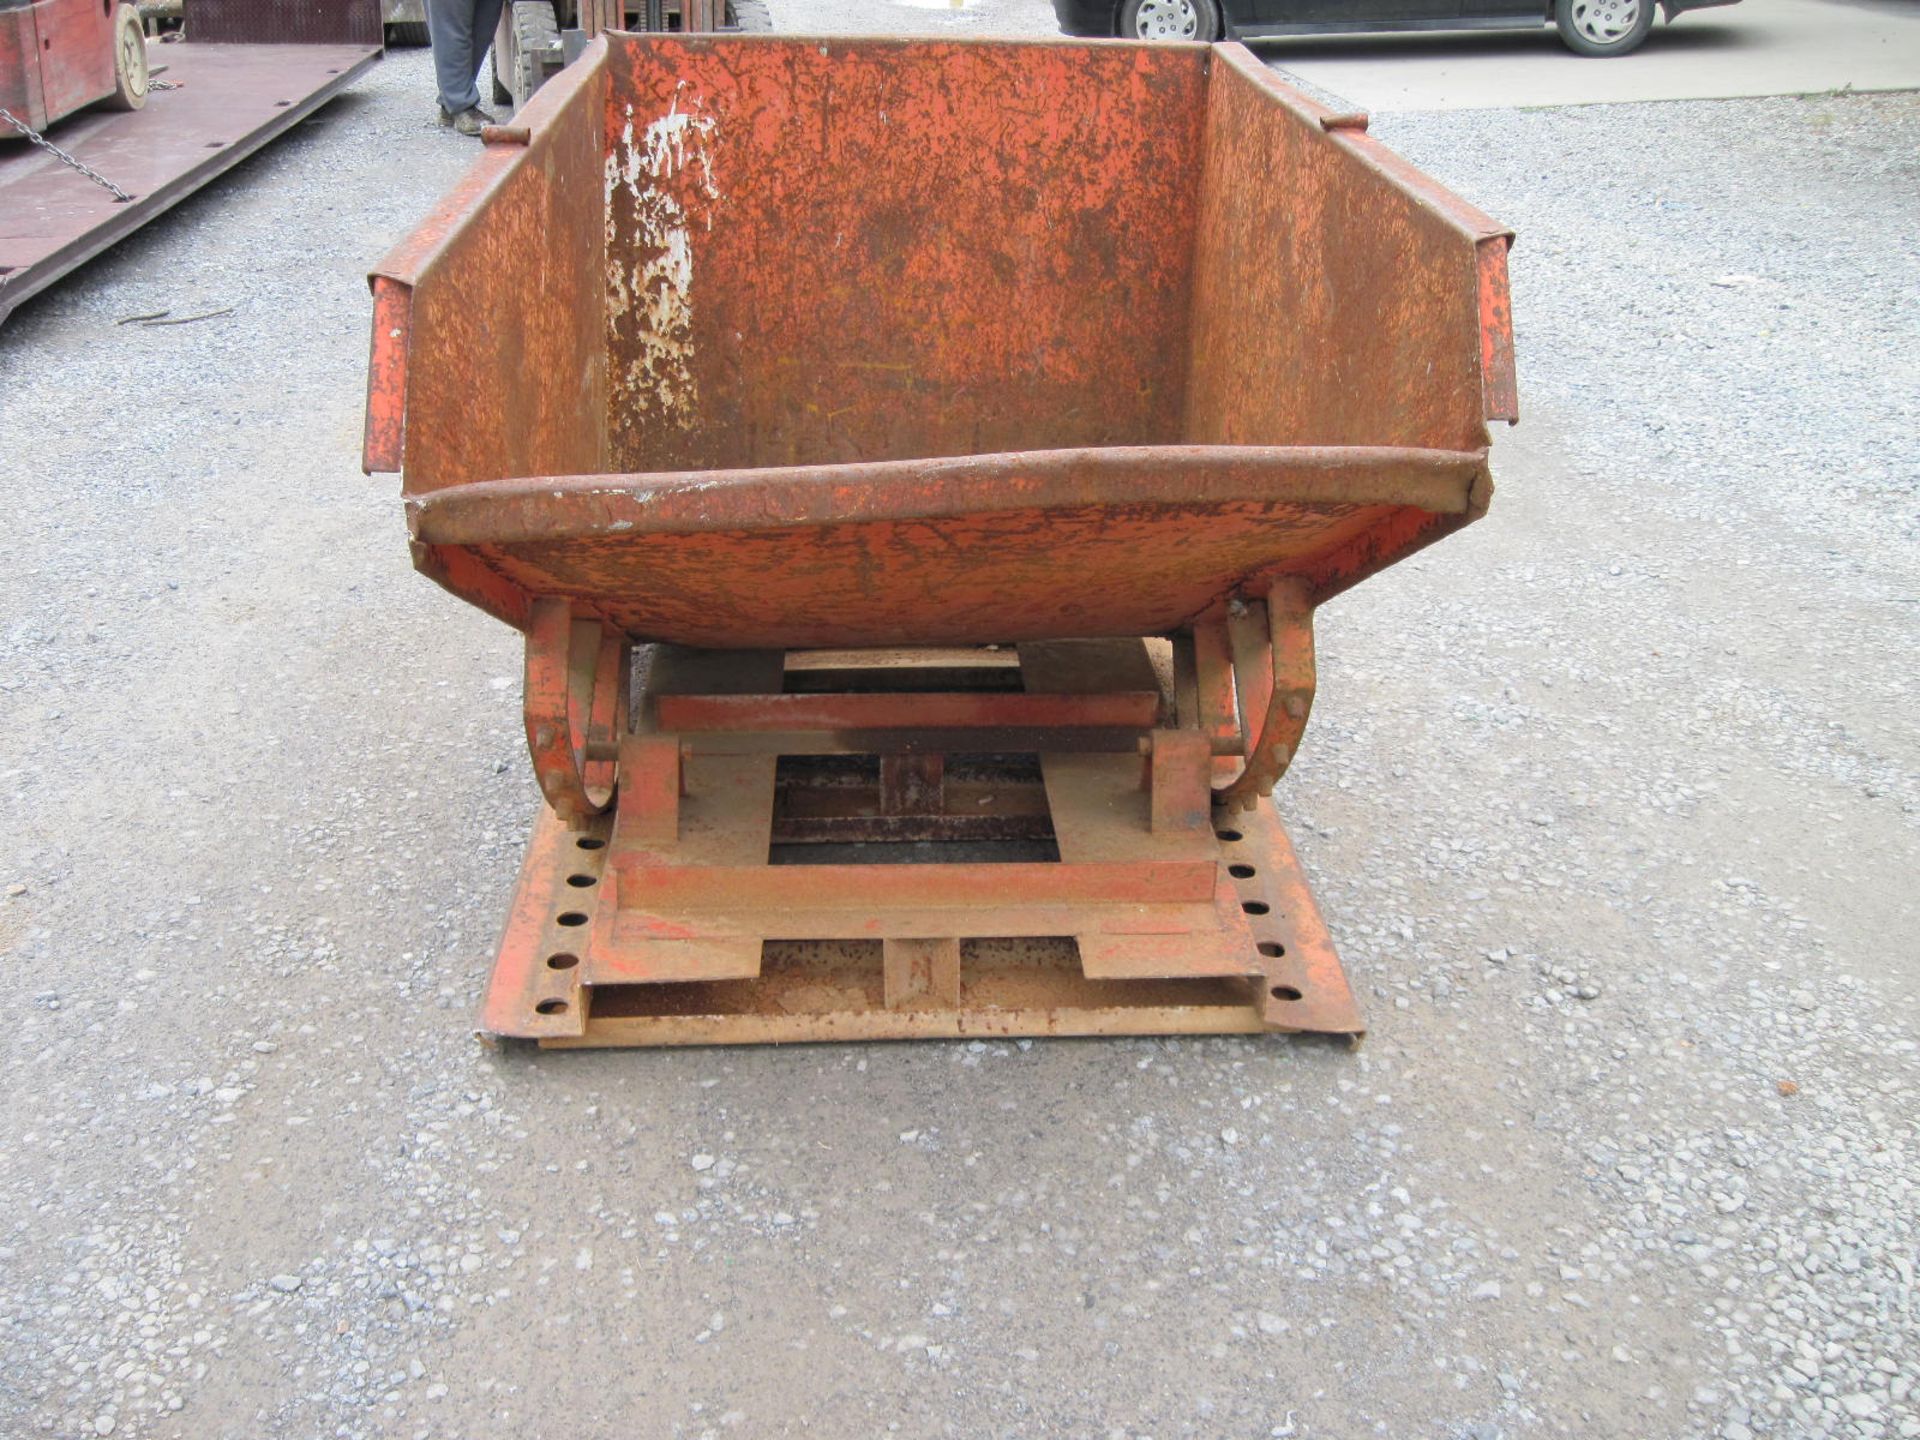 Self Dumping Hopper Attachment for Forklift, 1/2 Yard Capacity - Image 3 of 3